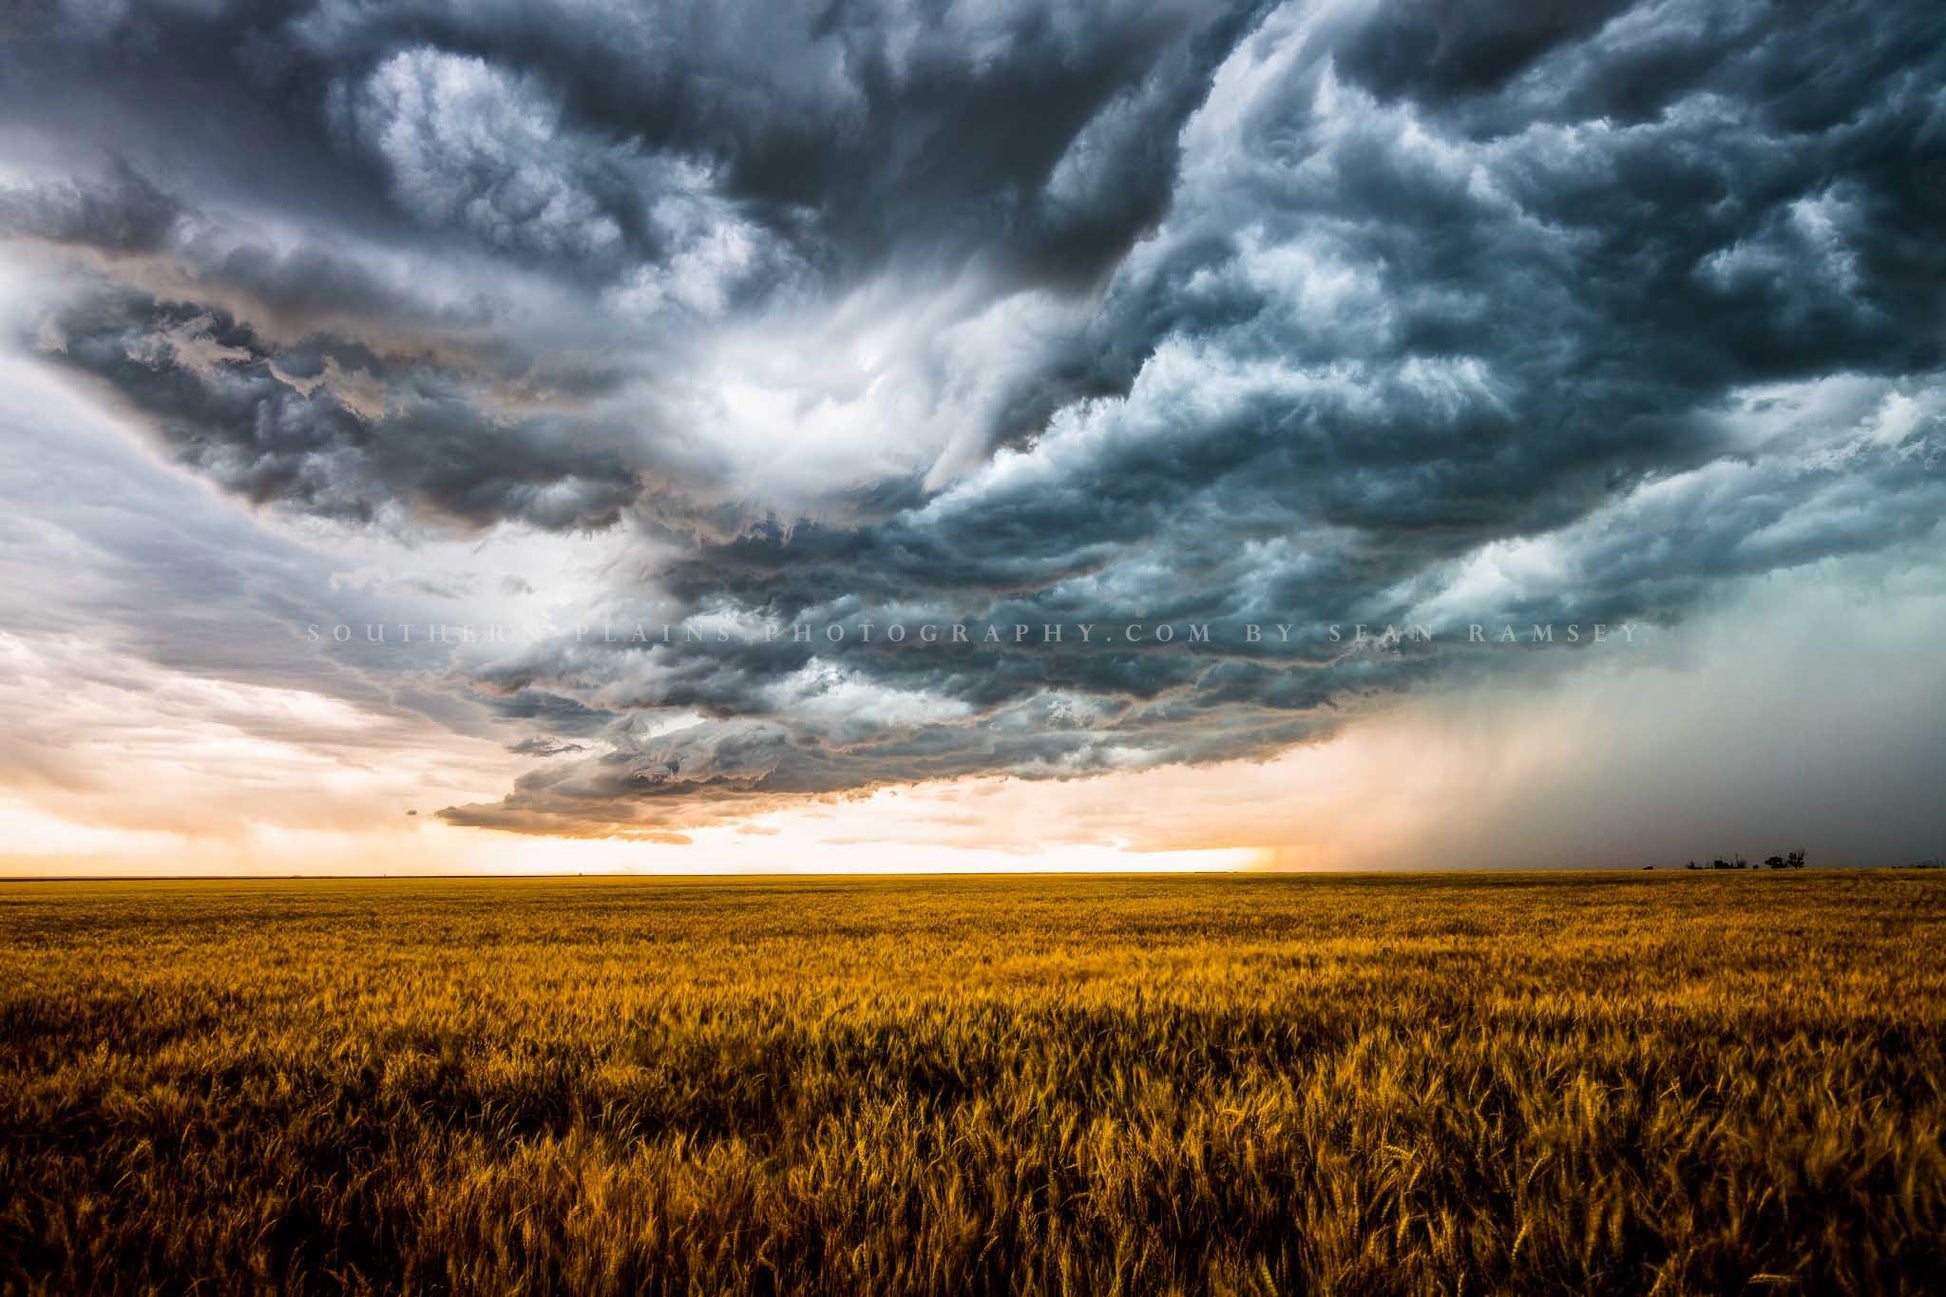 Western photography print of storm clouds churning over an amber wheat field on a stormy spring day on the plains of Colorado by Sean Ramsey of Southern Plains Photography.